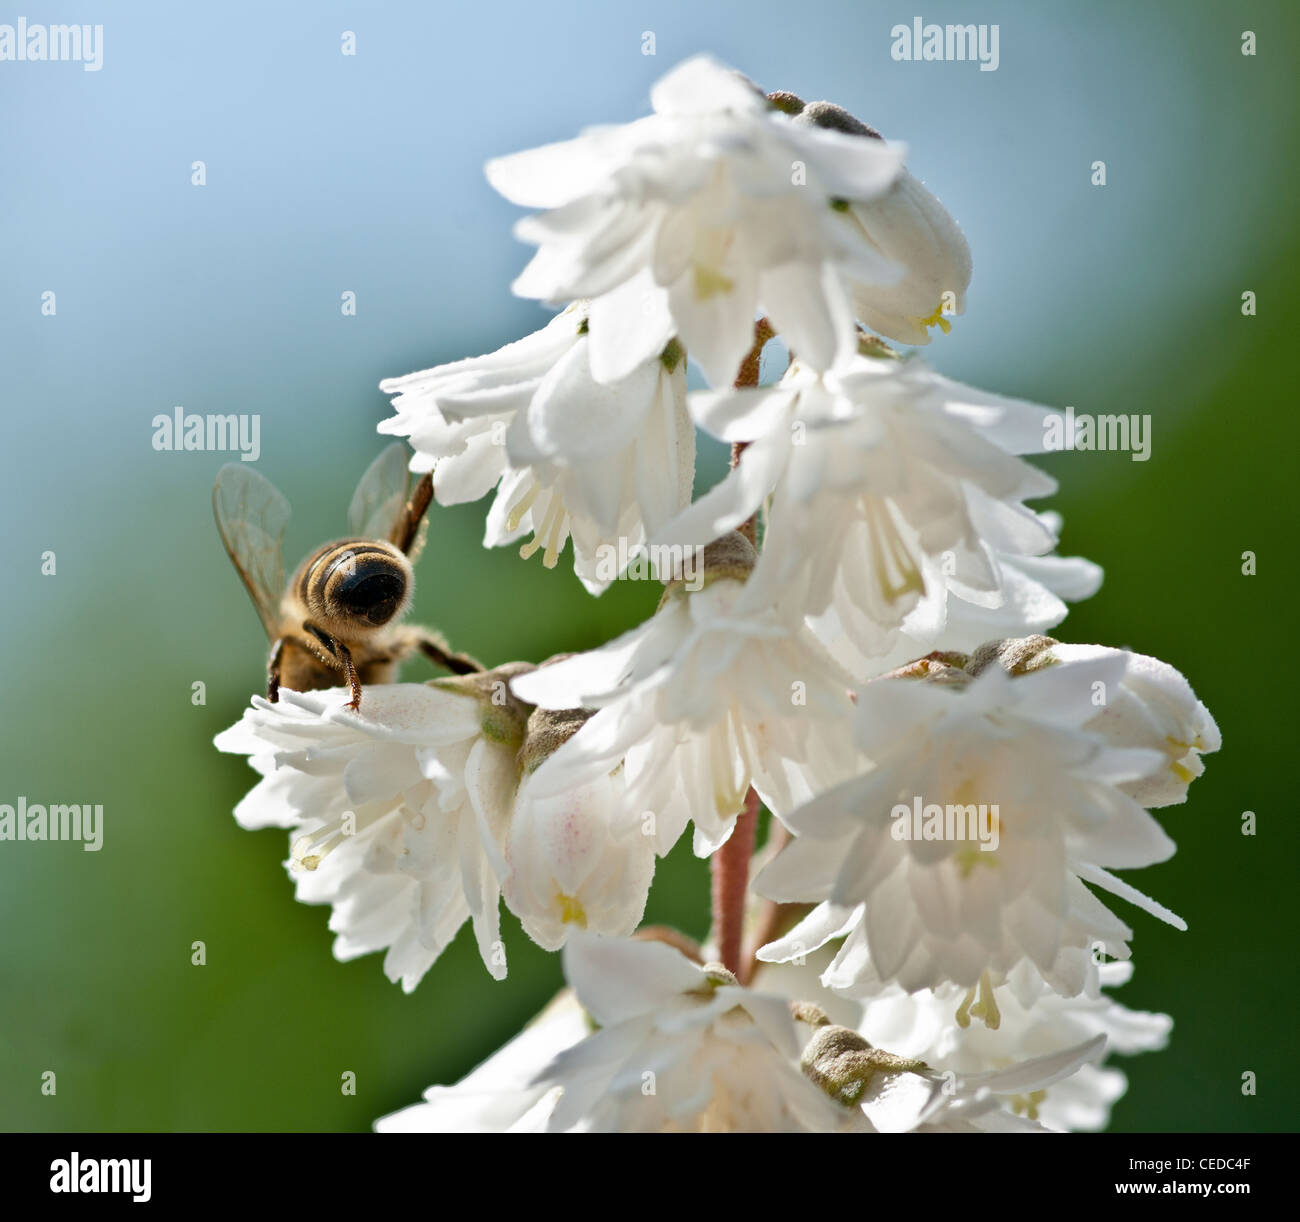 A bee pollinates flowers. Stock Photo